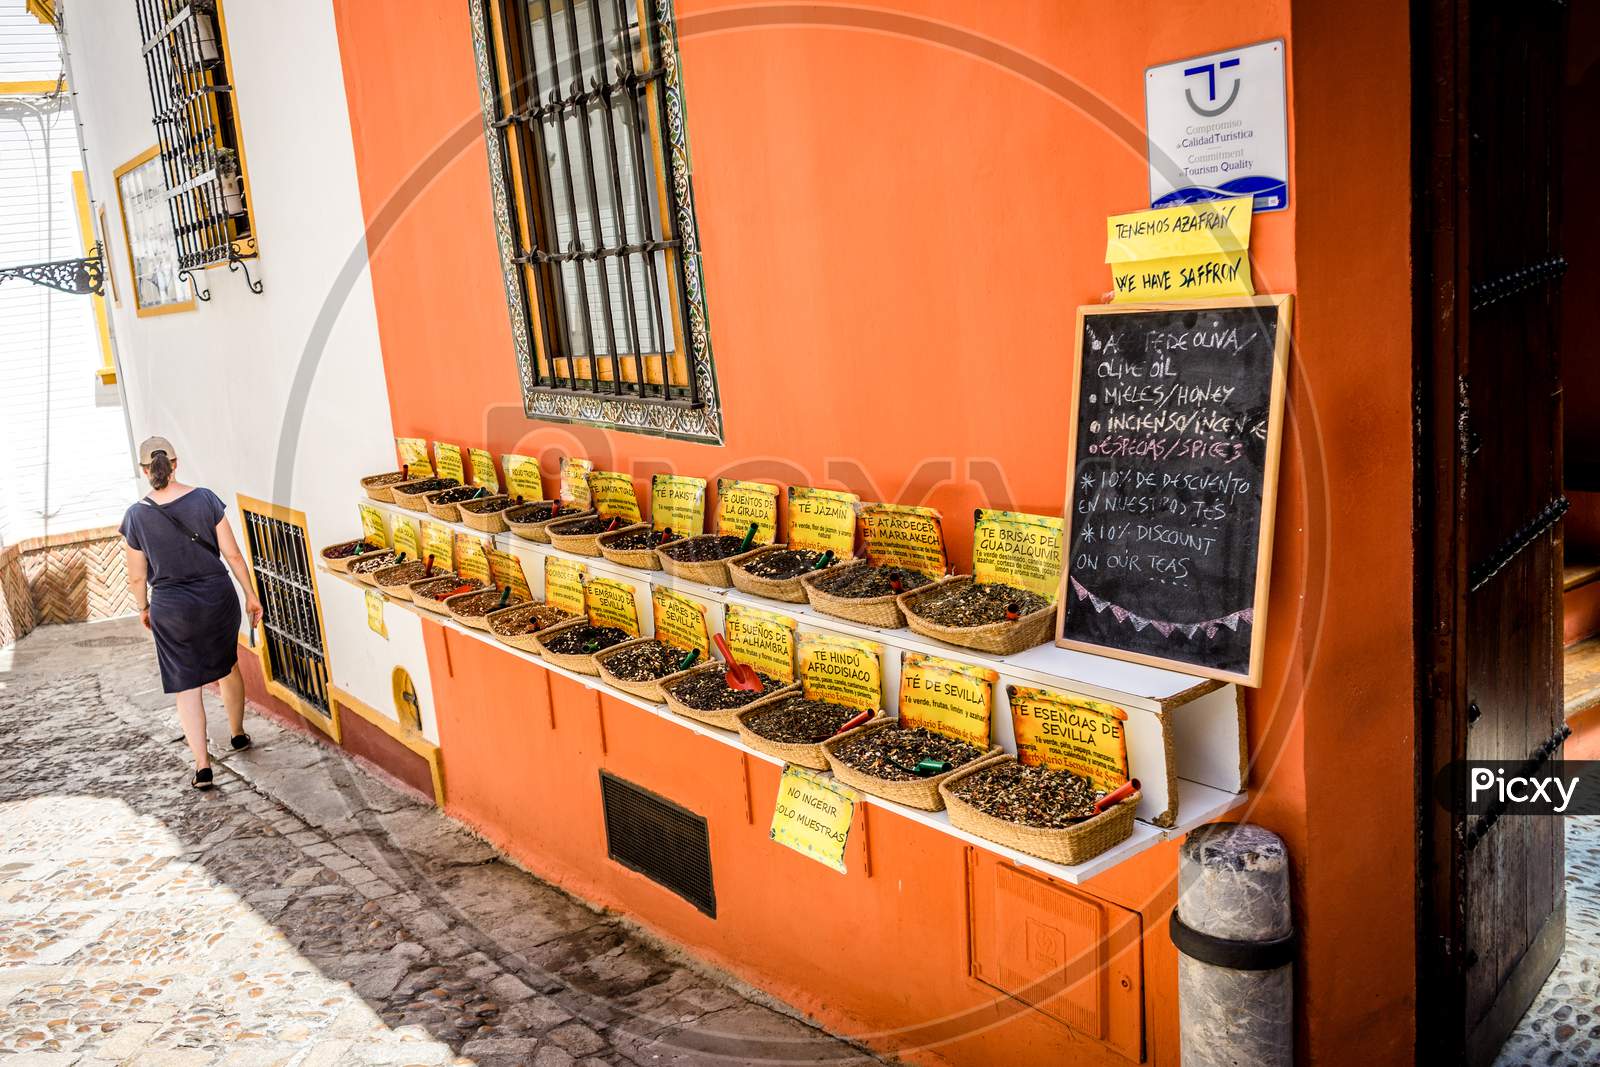 Seville, Spain- June 18, 2017 : Saffron And Other Spices Are Displayed On A Street Shop In Seville, Spain June 2017.